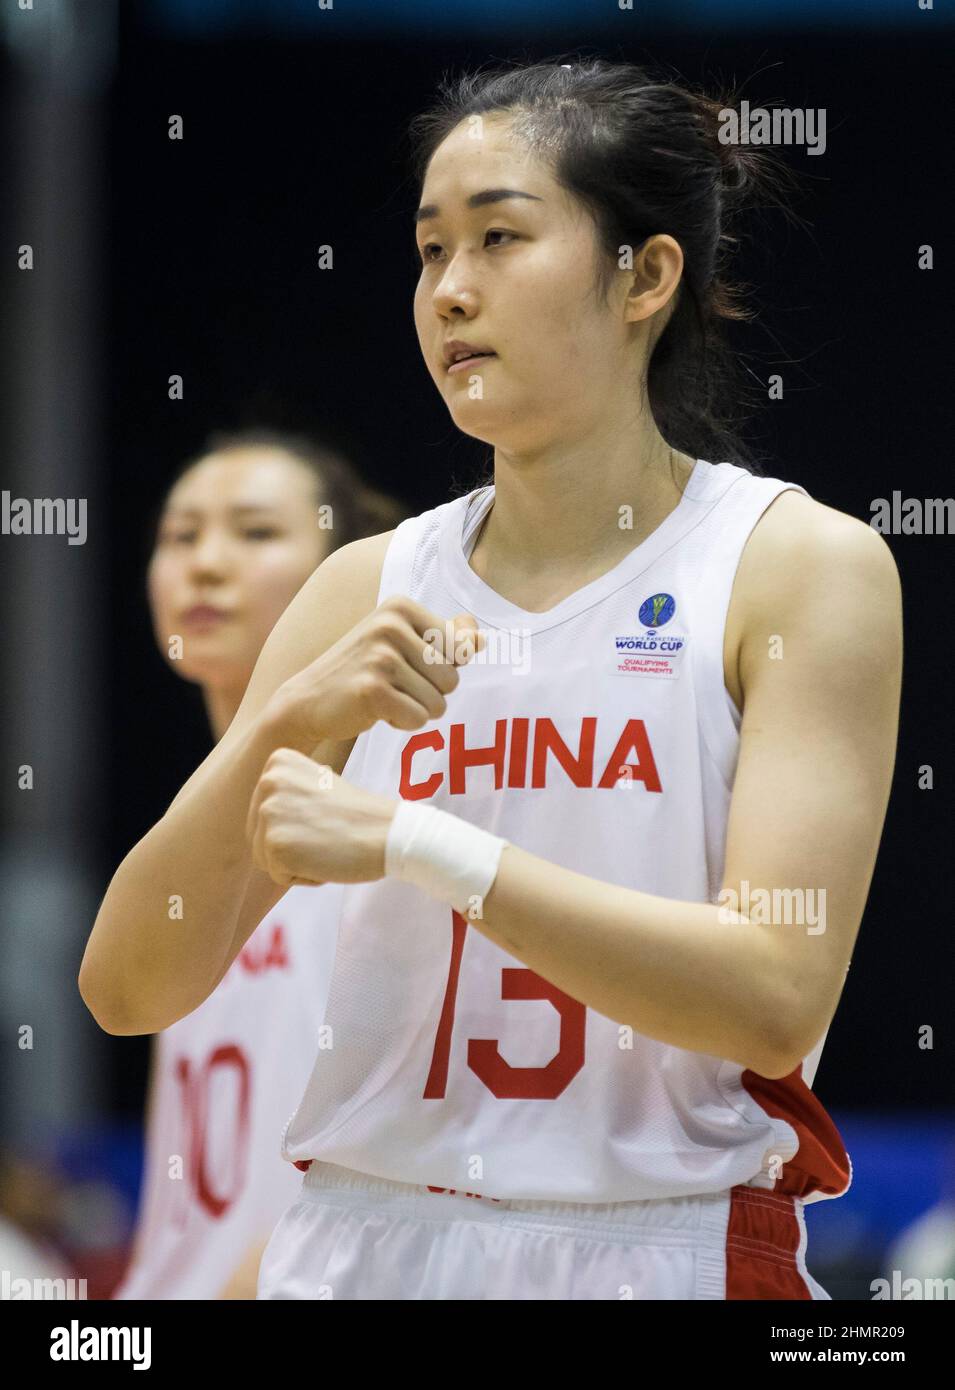 Belgrade, Serbia, 10th February 2022. Zhenqi Pan of China warms up during the FIBA Women's Basketball World Cup Qualifying Tournament match between China v Nigeria in Belgrade, Serbia. February 10, 2022. Credit: Nikola Krstic/Alamy Stock Photo